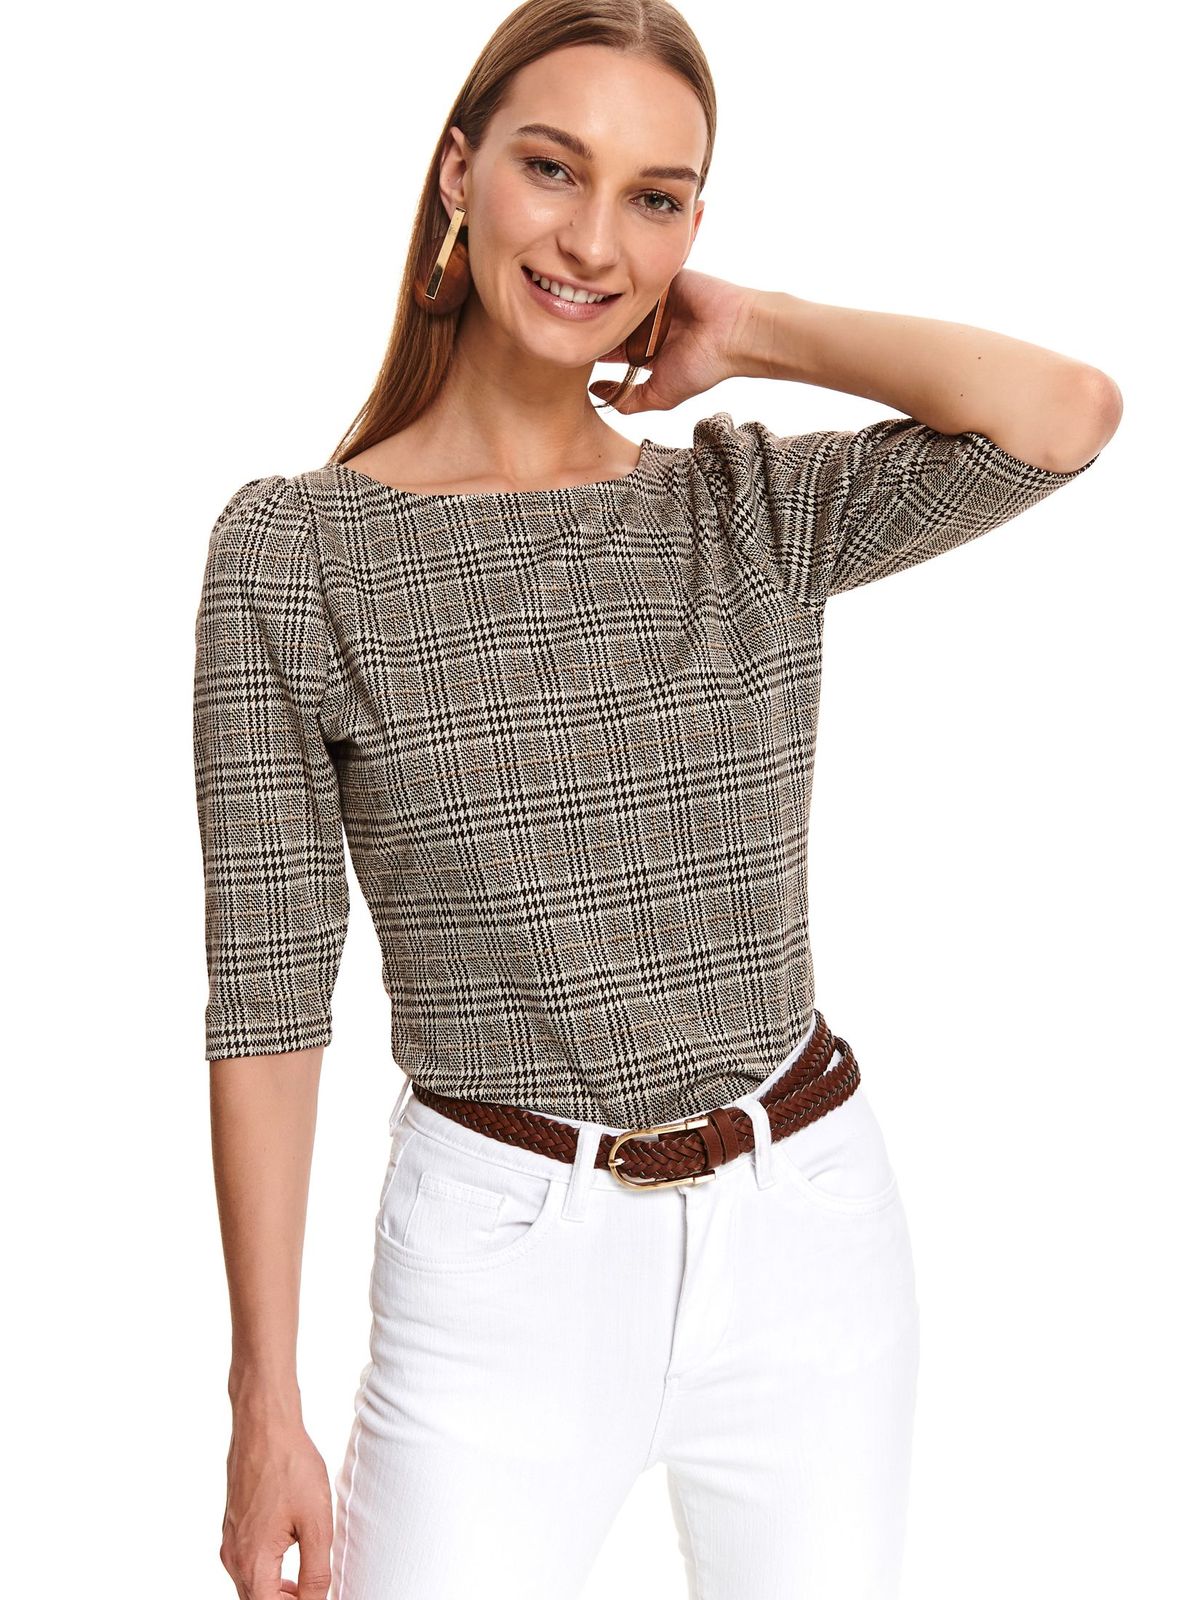 Women`s blouse with 3/4 sleeves with chequers nonelastic fabric